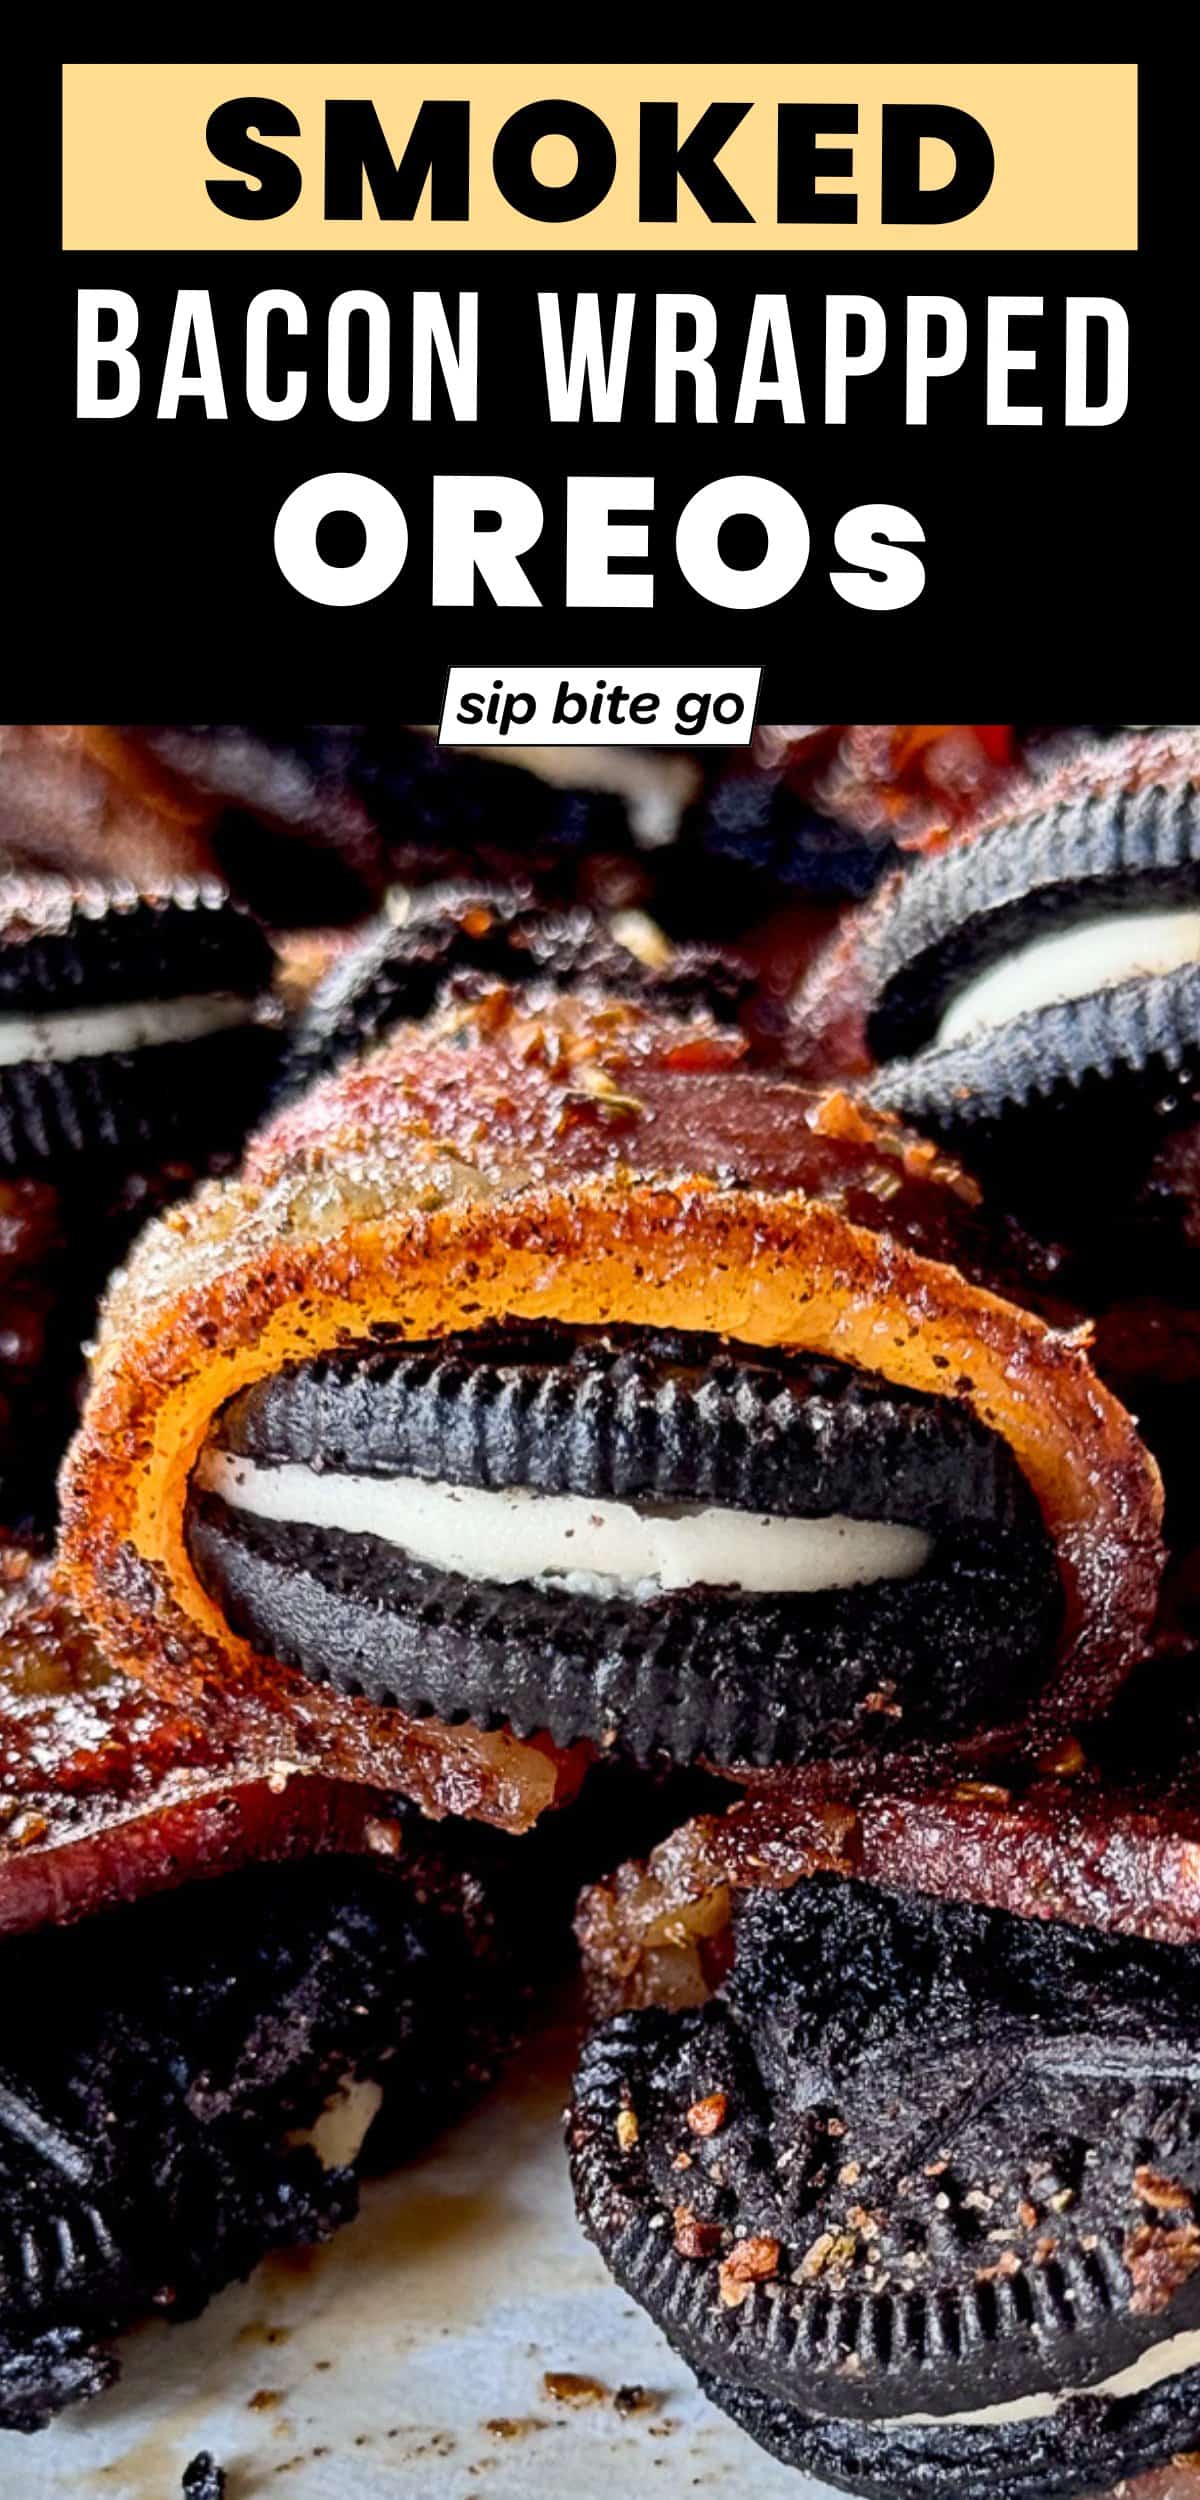 Traeger Smoked Bacon Wrapped Oreos Dessert with text overlay